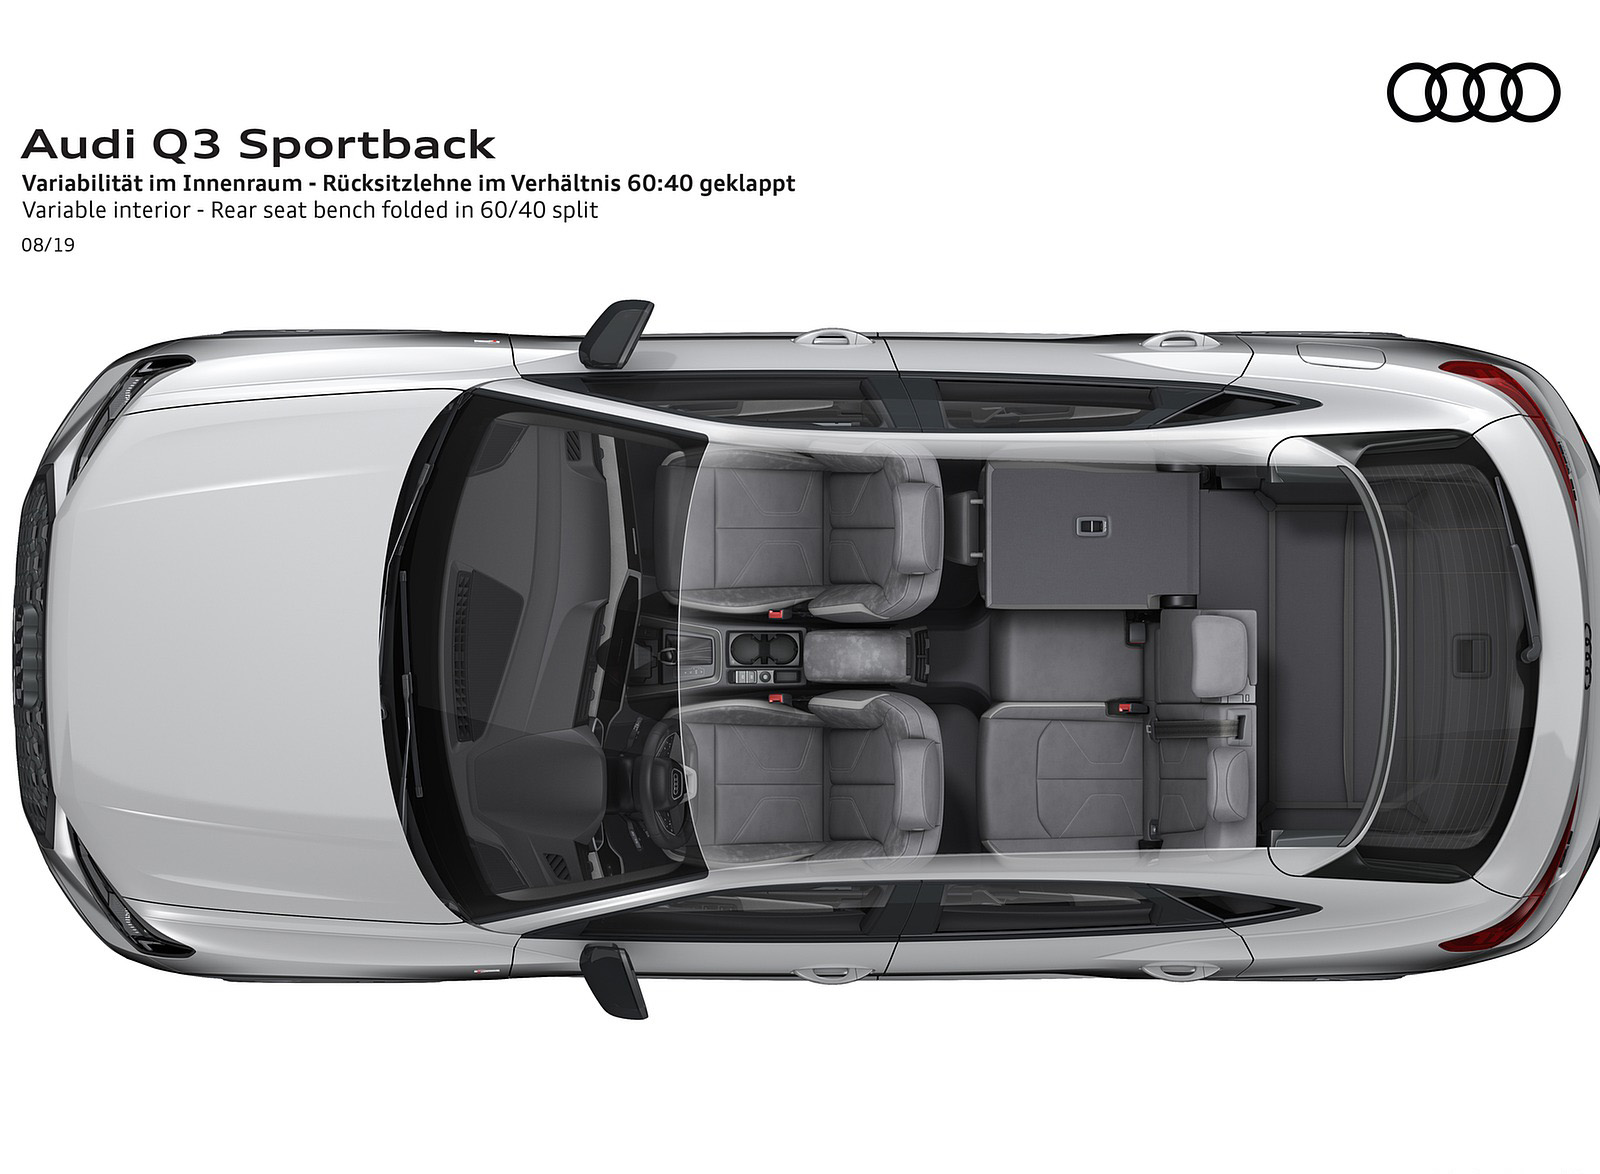 2020 Audi Q3 Sportback Variable interior Rear seat bench folded Wallpapers #264 of 285